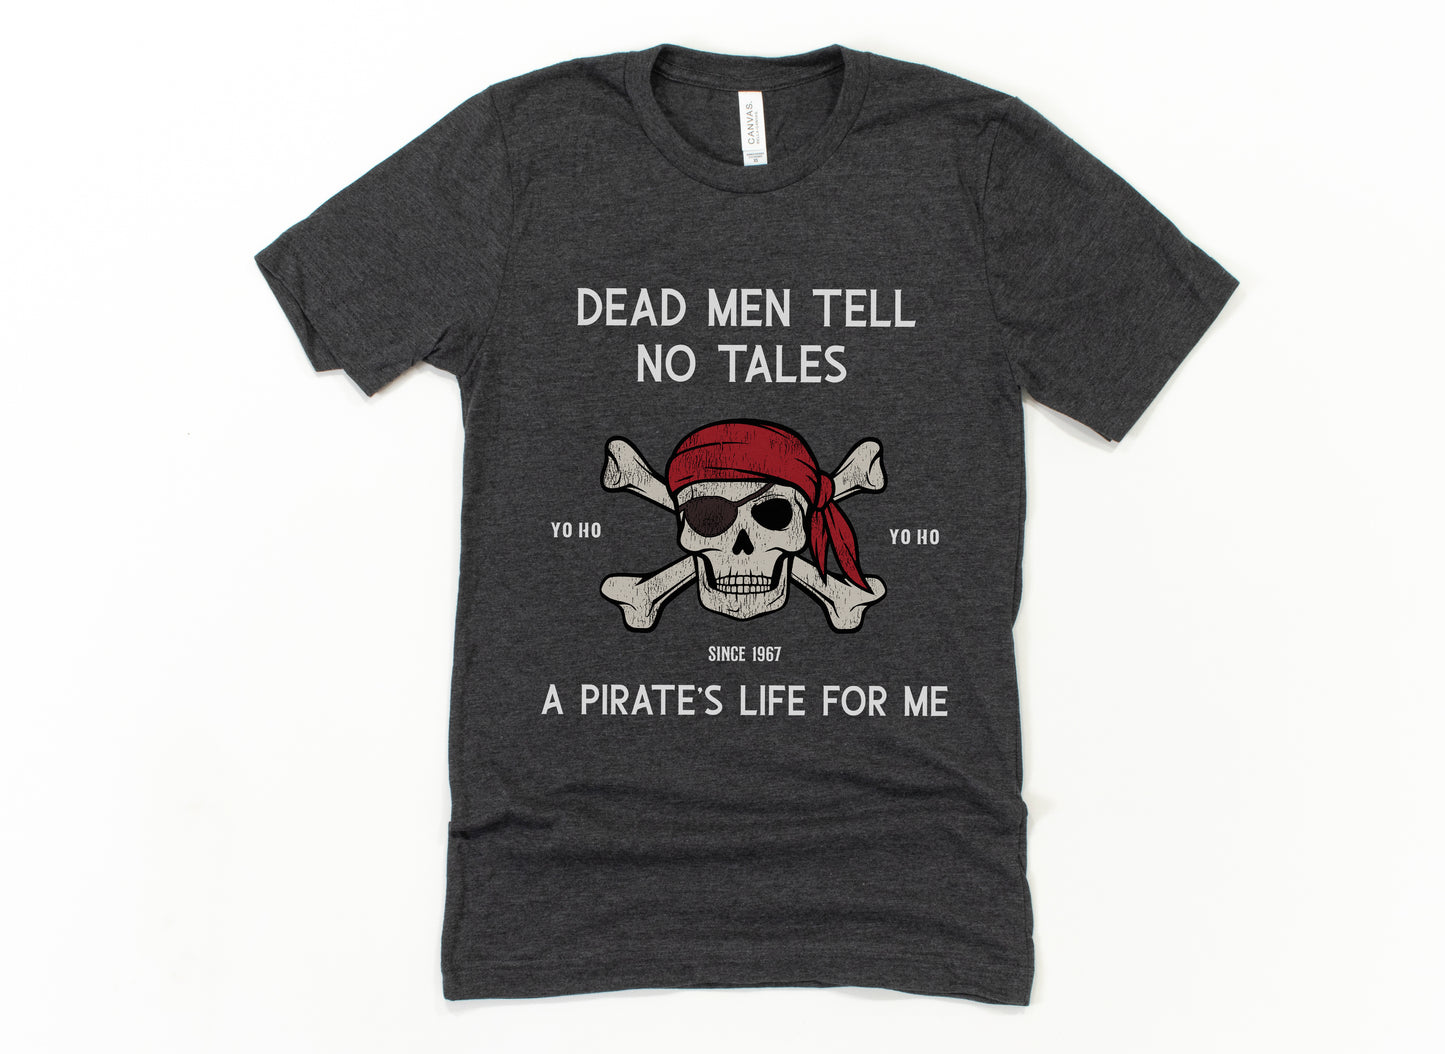 Tell No Tales (Adult) - Front Print